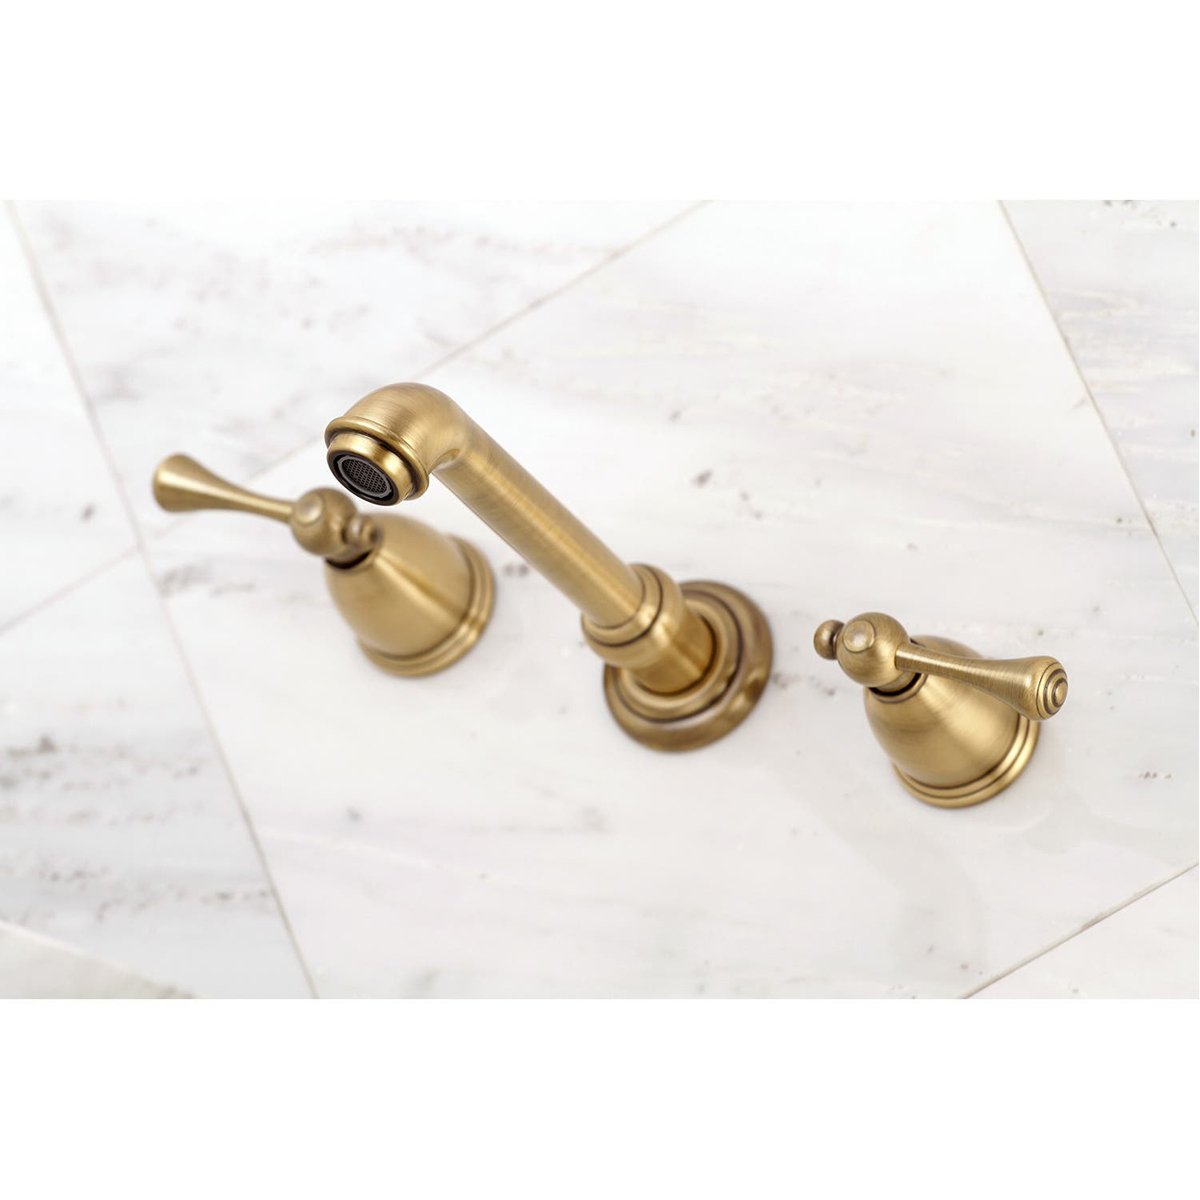 Kingston Brass English Country Wall Mount 8-Inch Center Roman Tub Filler